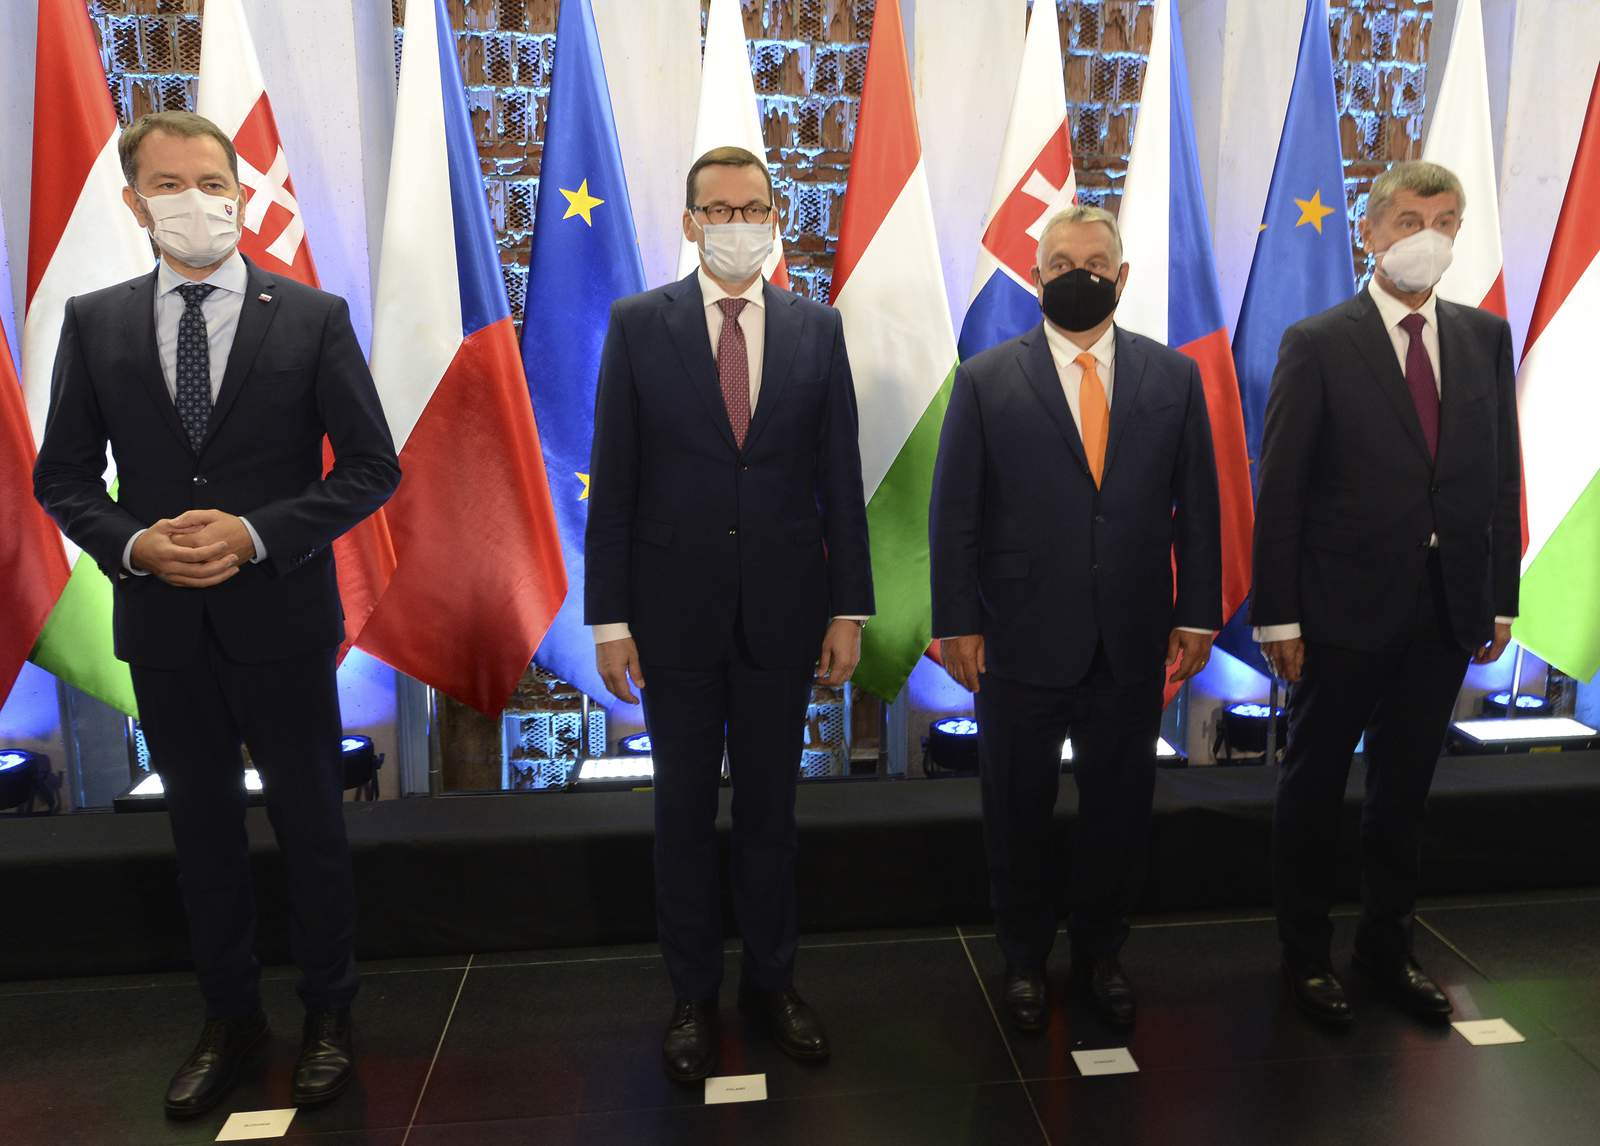 Central European leaders discuss Belarus, fighting COVID-19